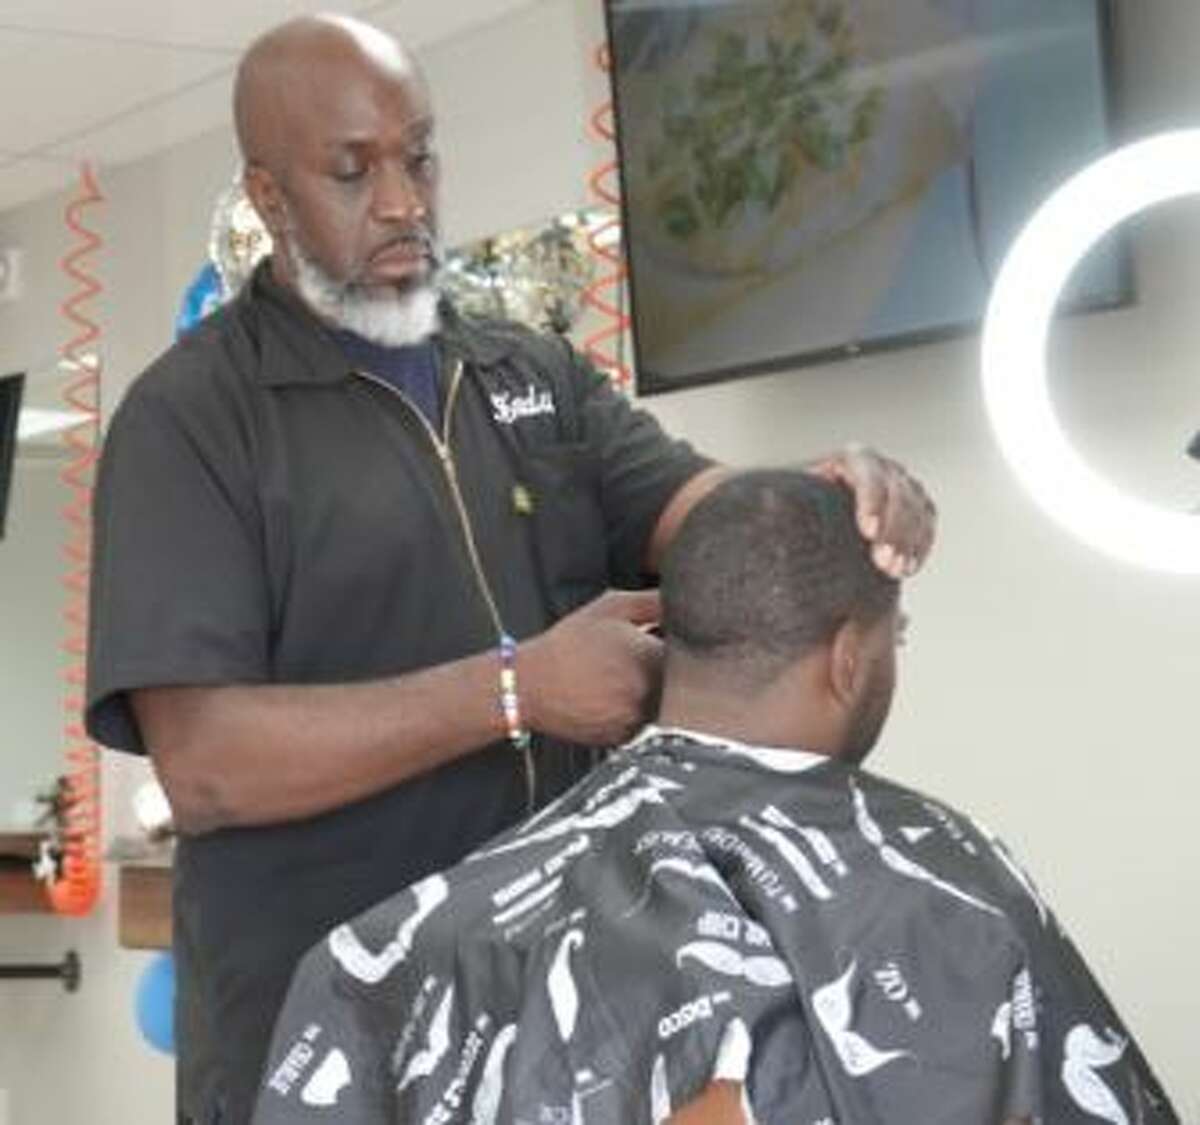 The Capital District Barbershop Lounge is in Albany's Loudon Plaza and will offer free haircuts to boys ages 15 and under on Sept. 5, 2021, in time for the new school year.